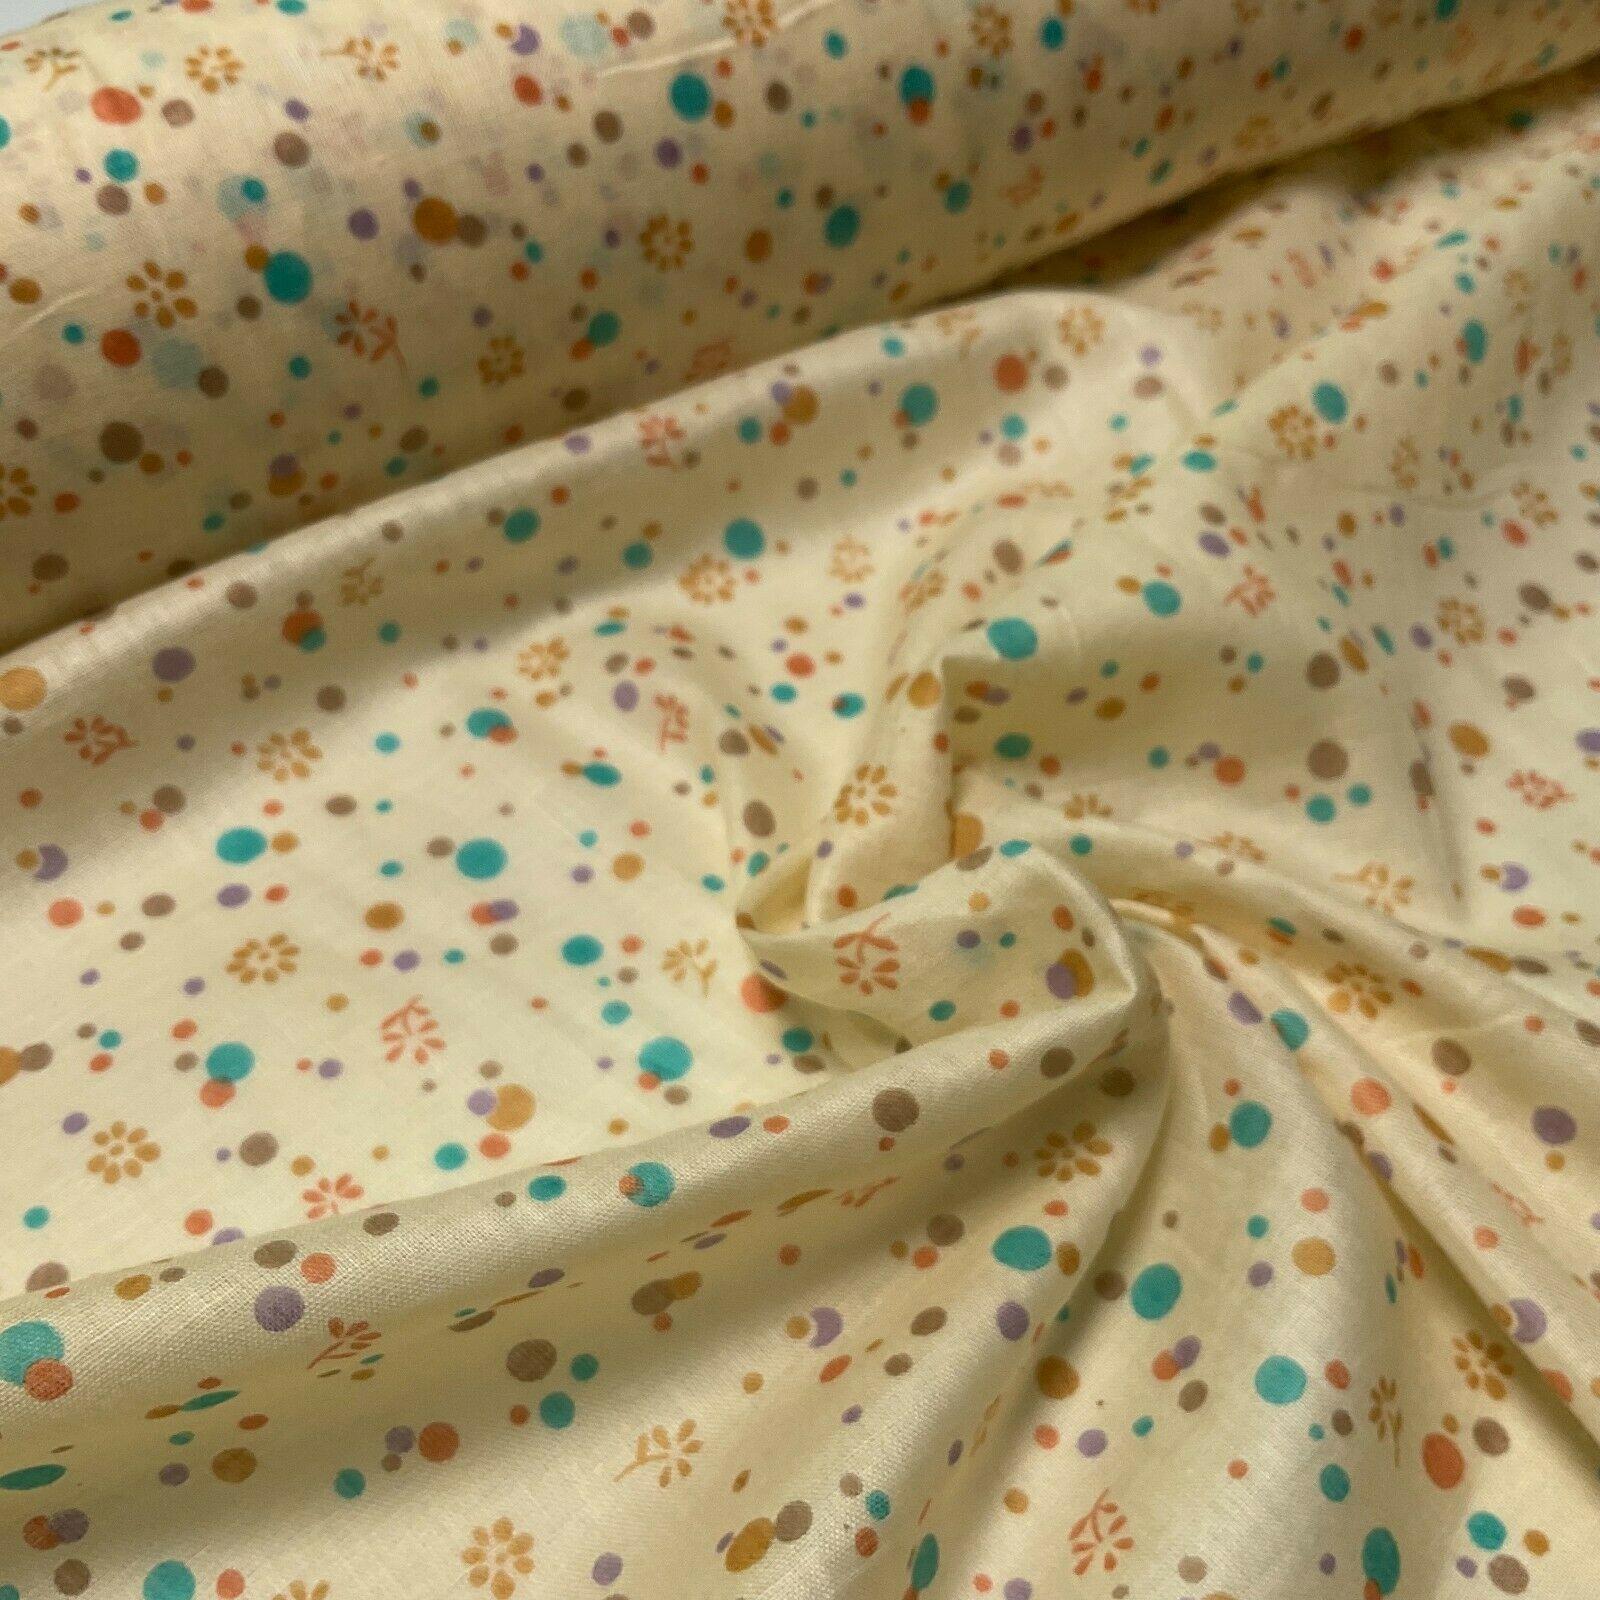 Cotton Lawn Summer small Floral dot Printed Dress fabric 111cm wide M1595